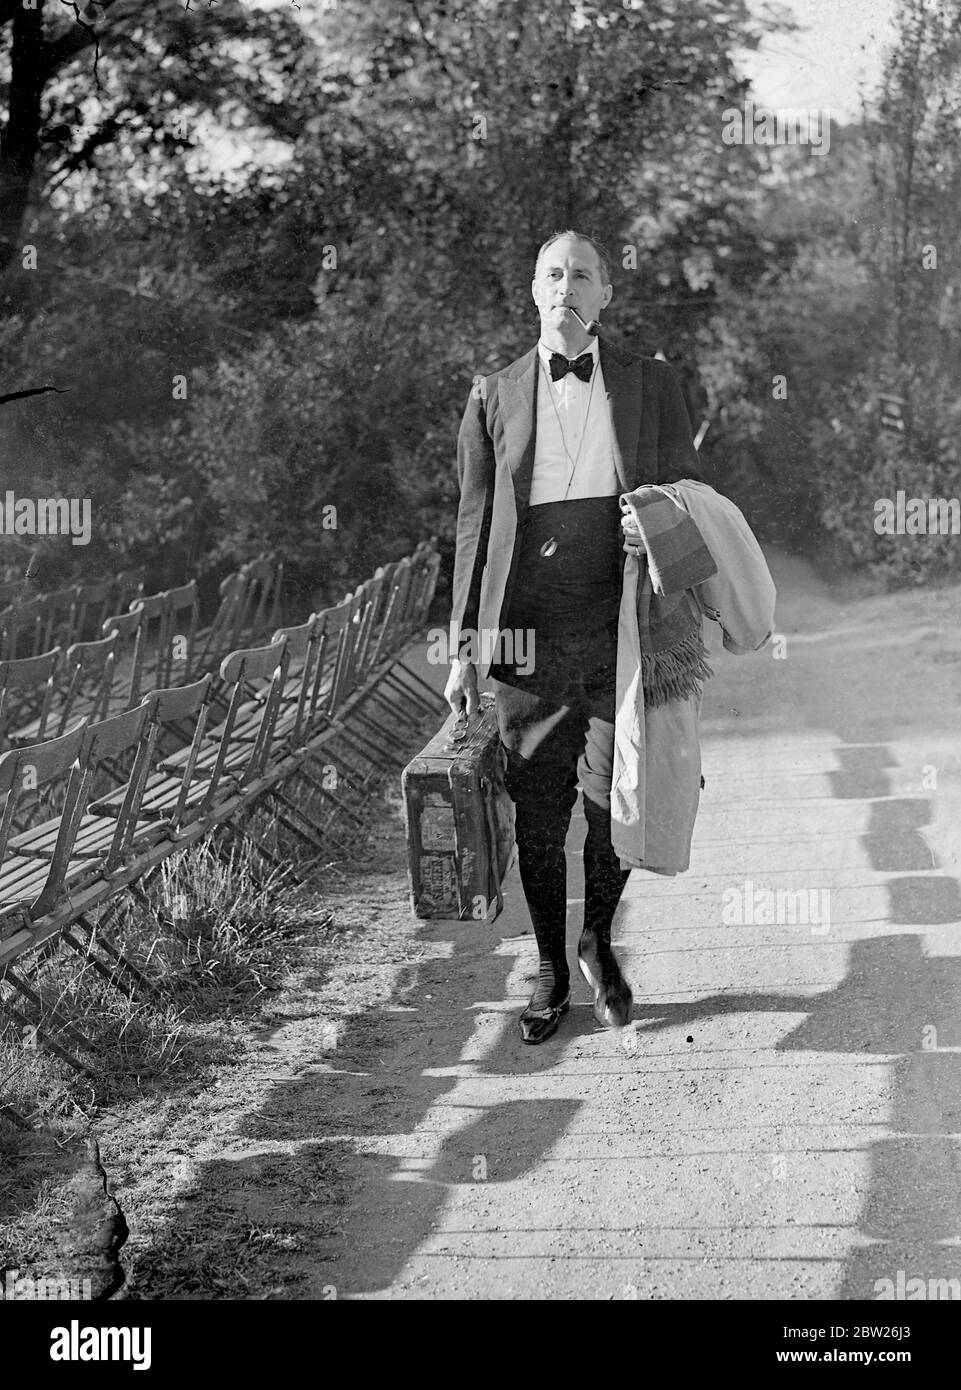 Men's dress Reform Party have reception in Regent's Park. Clad in 'reformed' masculine costume guests attended a reception of the Men's Dress Reform at the Open Air Theatre in Regent's Park, London. Photo shows, Mr F H Rogers arriving in 'evening dress'. 29 June 1938 Stock Photo